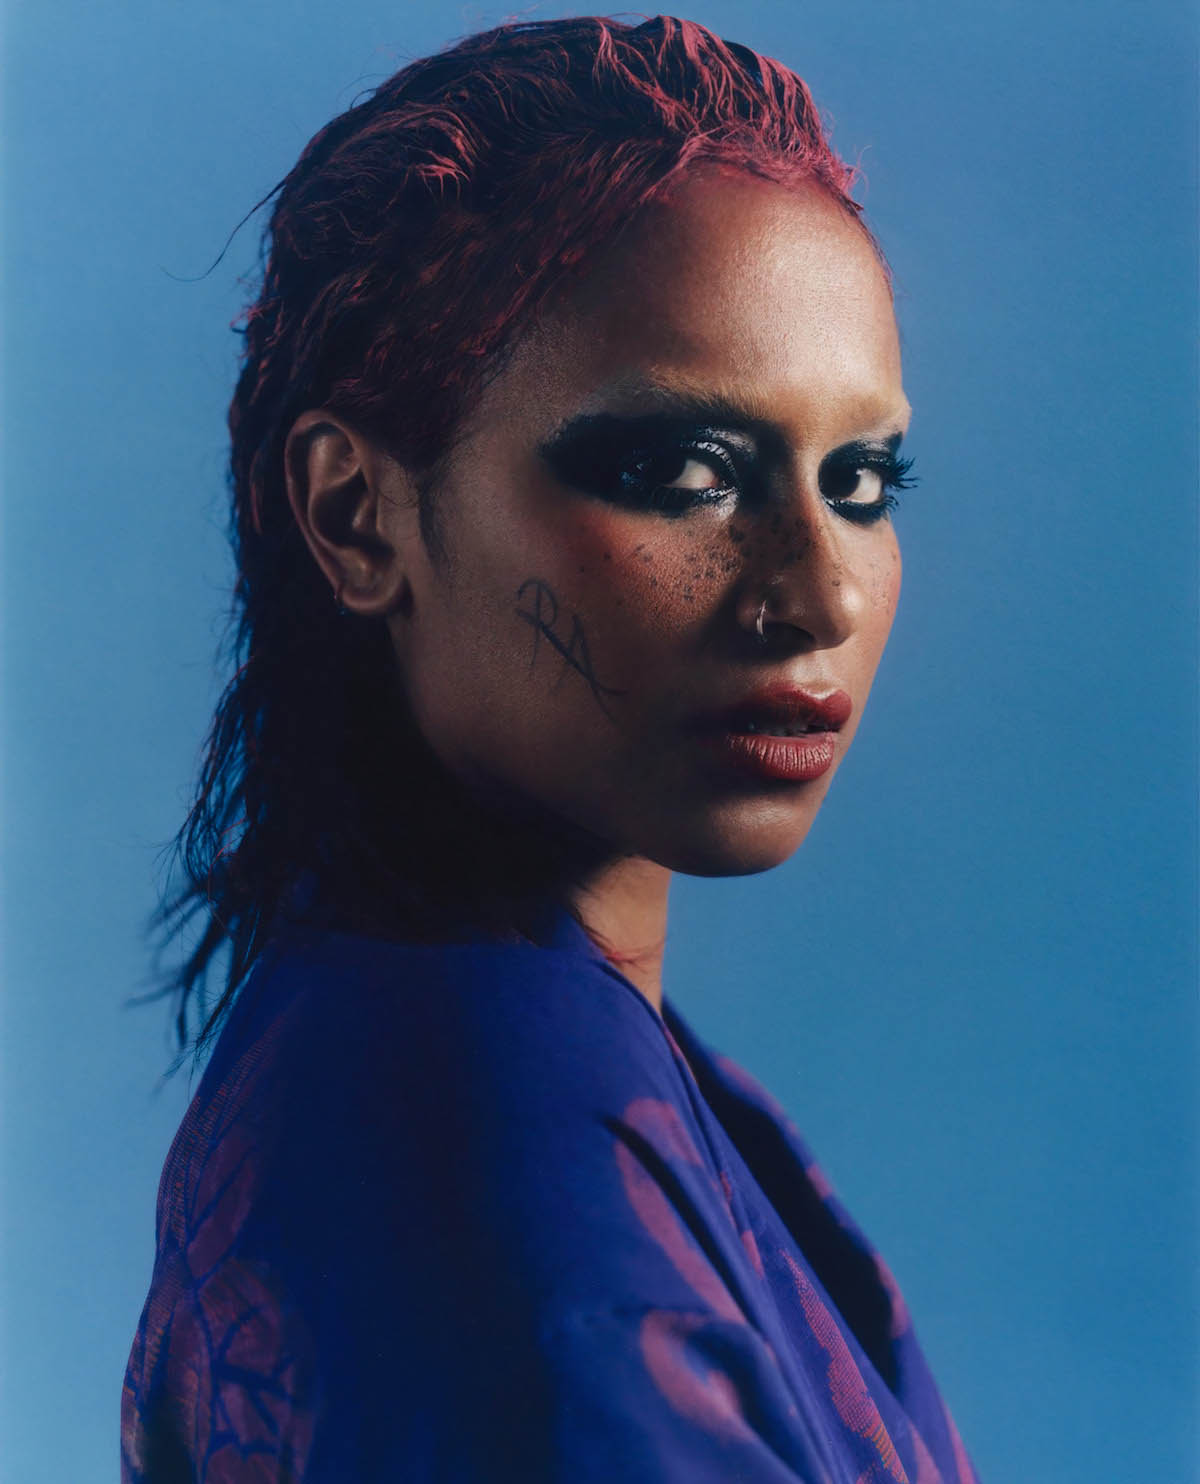 Female, Black person with darkly made-up eyes looks sideways into the camera. She wears a nose ring, a blue top and her red dyed hair is styled back. The letters "RA" are written on her cheek.